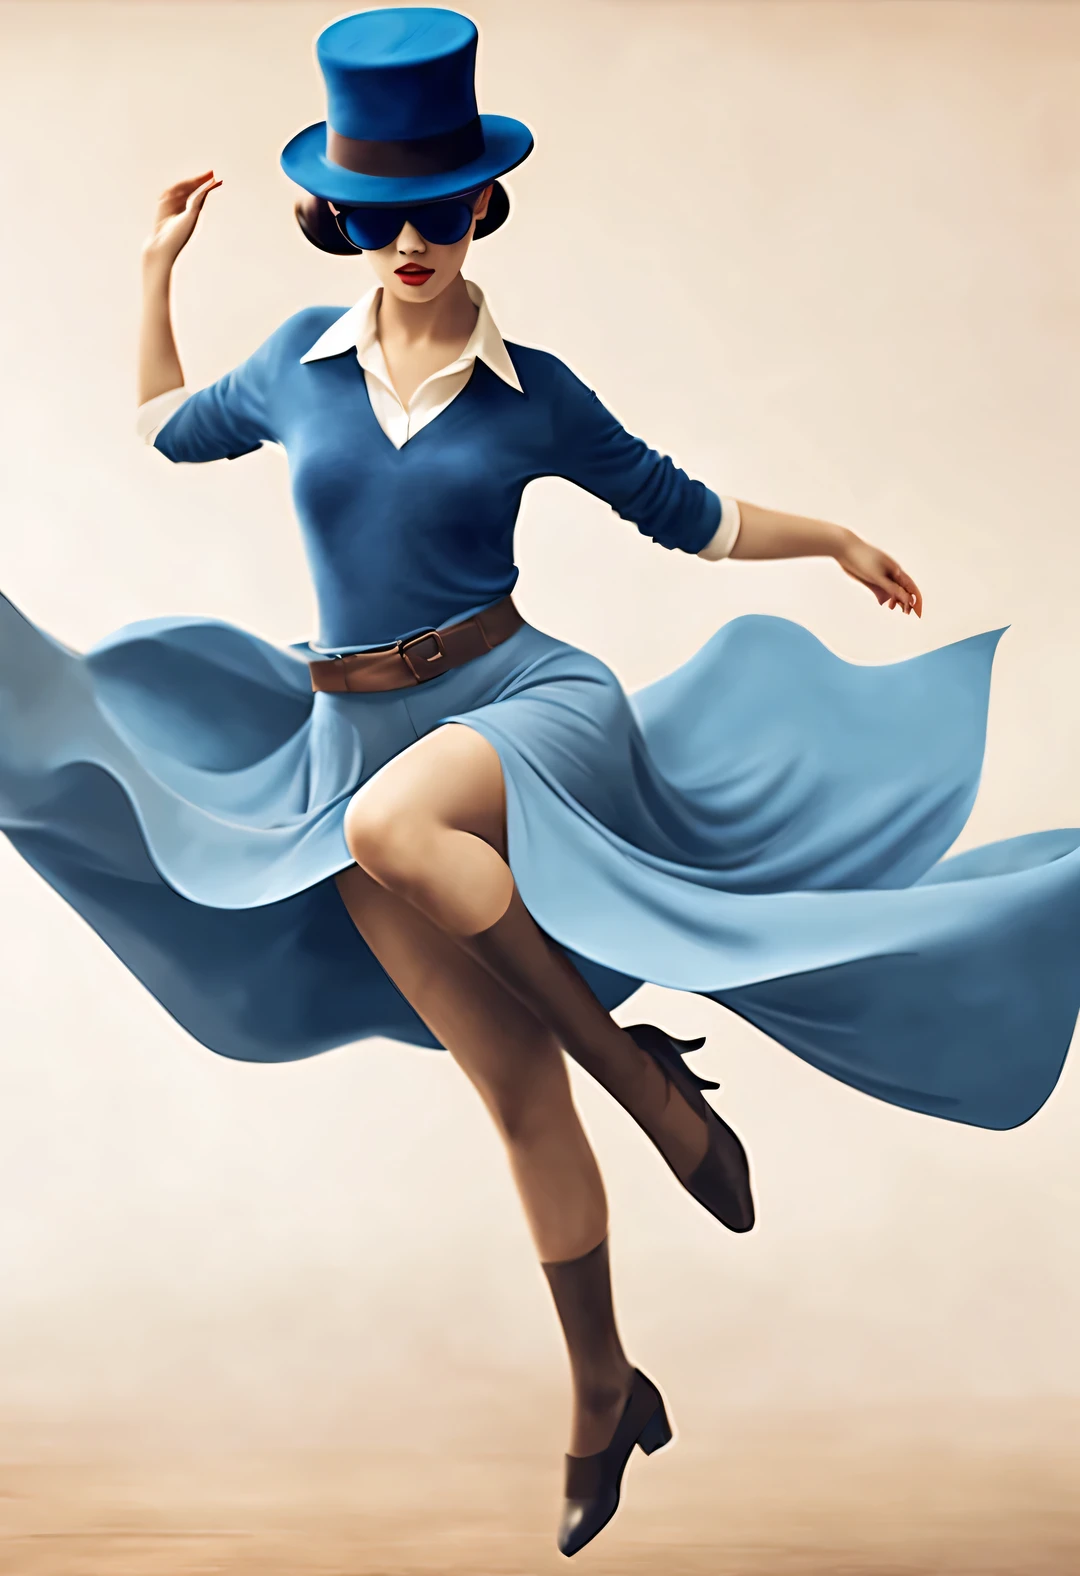 (Modern art dance simple poster design), (Half-length close-up), (Beautiful Chinese girl dancing in the air), (Wear modern fashionable winter fashion: 0.8), (Wearing big sunglasses and top hat: 1.2), Harmonious combination of classic and modern, An elegant combination of dark blue and brown，Highlight the retro charm without losing fashion sense. sweater and jeans, and high-end silk scarves and jackets, Exudes elegance, Girl fair and flawless smooth skin, high nose bridge, Head up posture, sad yet beautiful, slender figure, Exquisite facial features,
swirling fog illustration, ink painting, black hair, a ball head, Proud, Surrealism, contemporary art photography, action painting illustration, abstract expressionism, Pixar, depth of field, motion blur, backlight, Fall out, decline, Elevation viewing angle, Sony FE General Manager, ultra high definition, masterpiece, Accuracy, textured skin, Super details, high detail, high quality, Award-winning, best quality, Level, 16k, Shot from a bottom-up perspective,